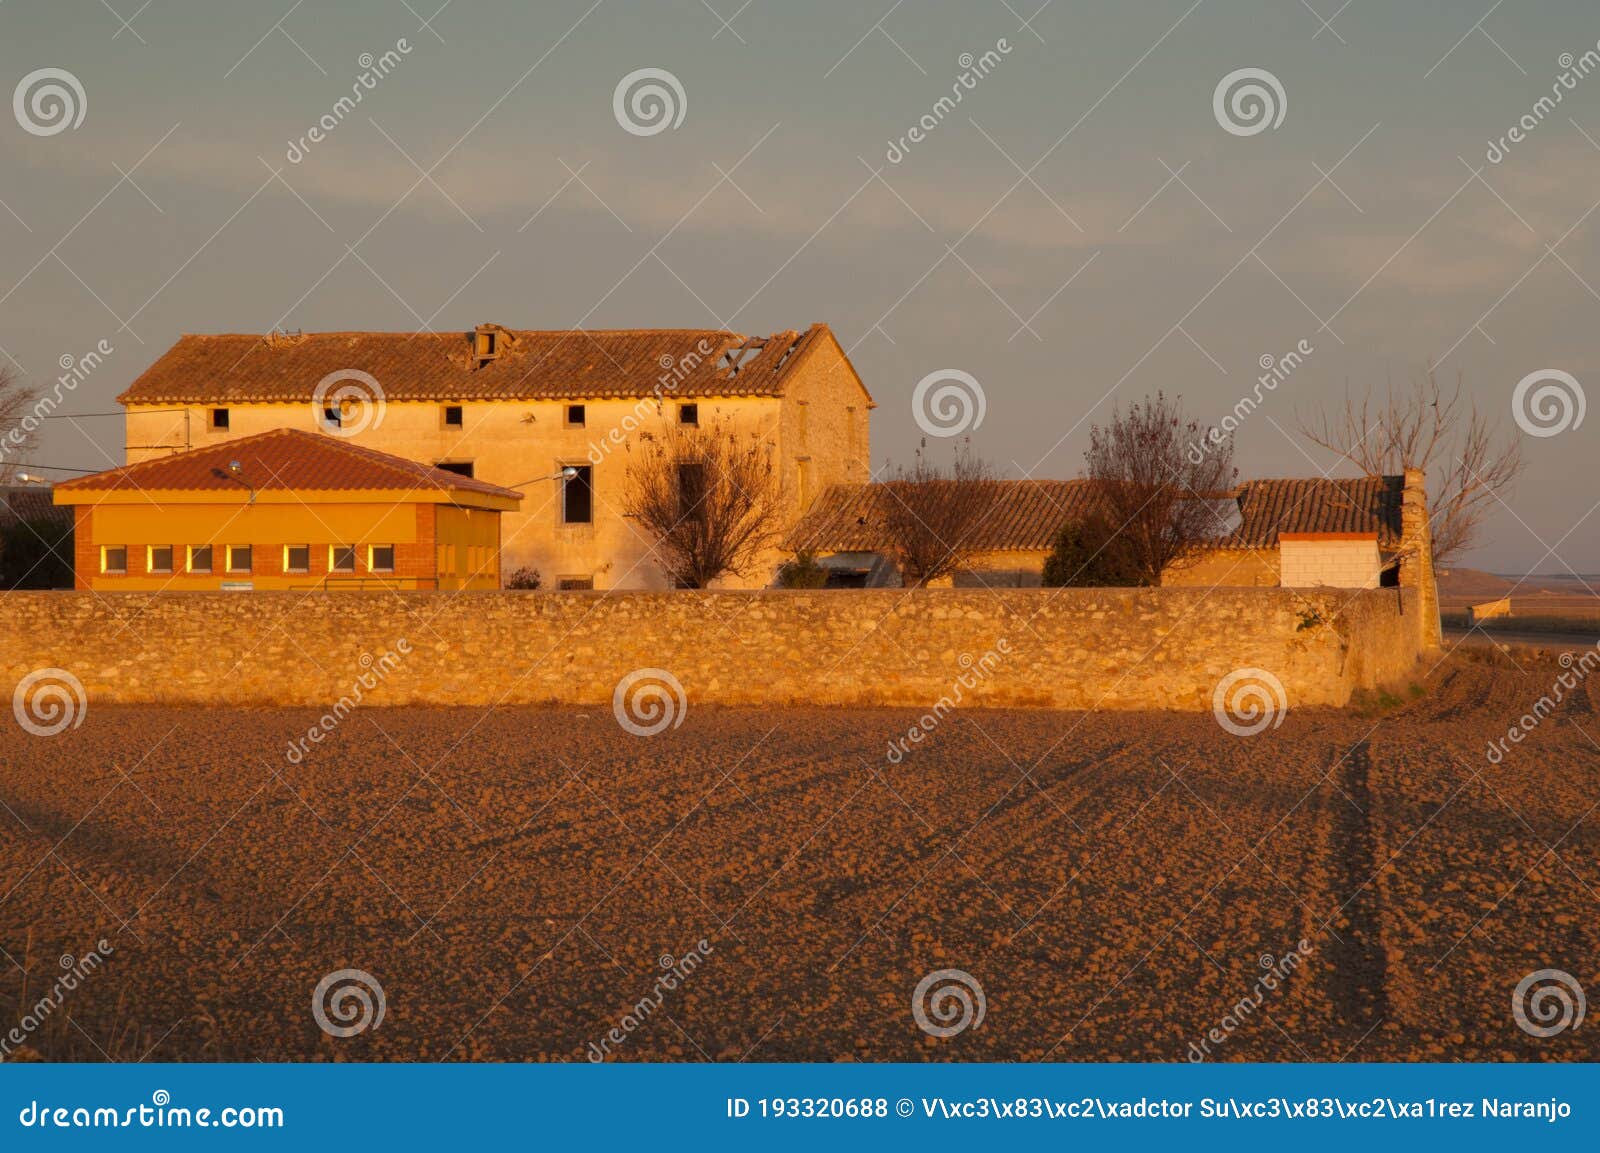 buildings and rural landscape in the village of bello.